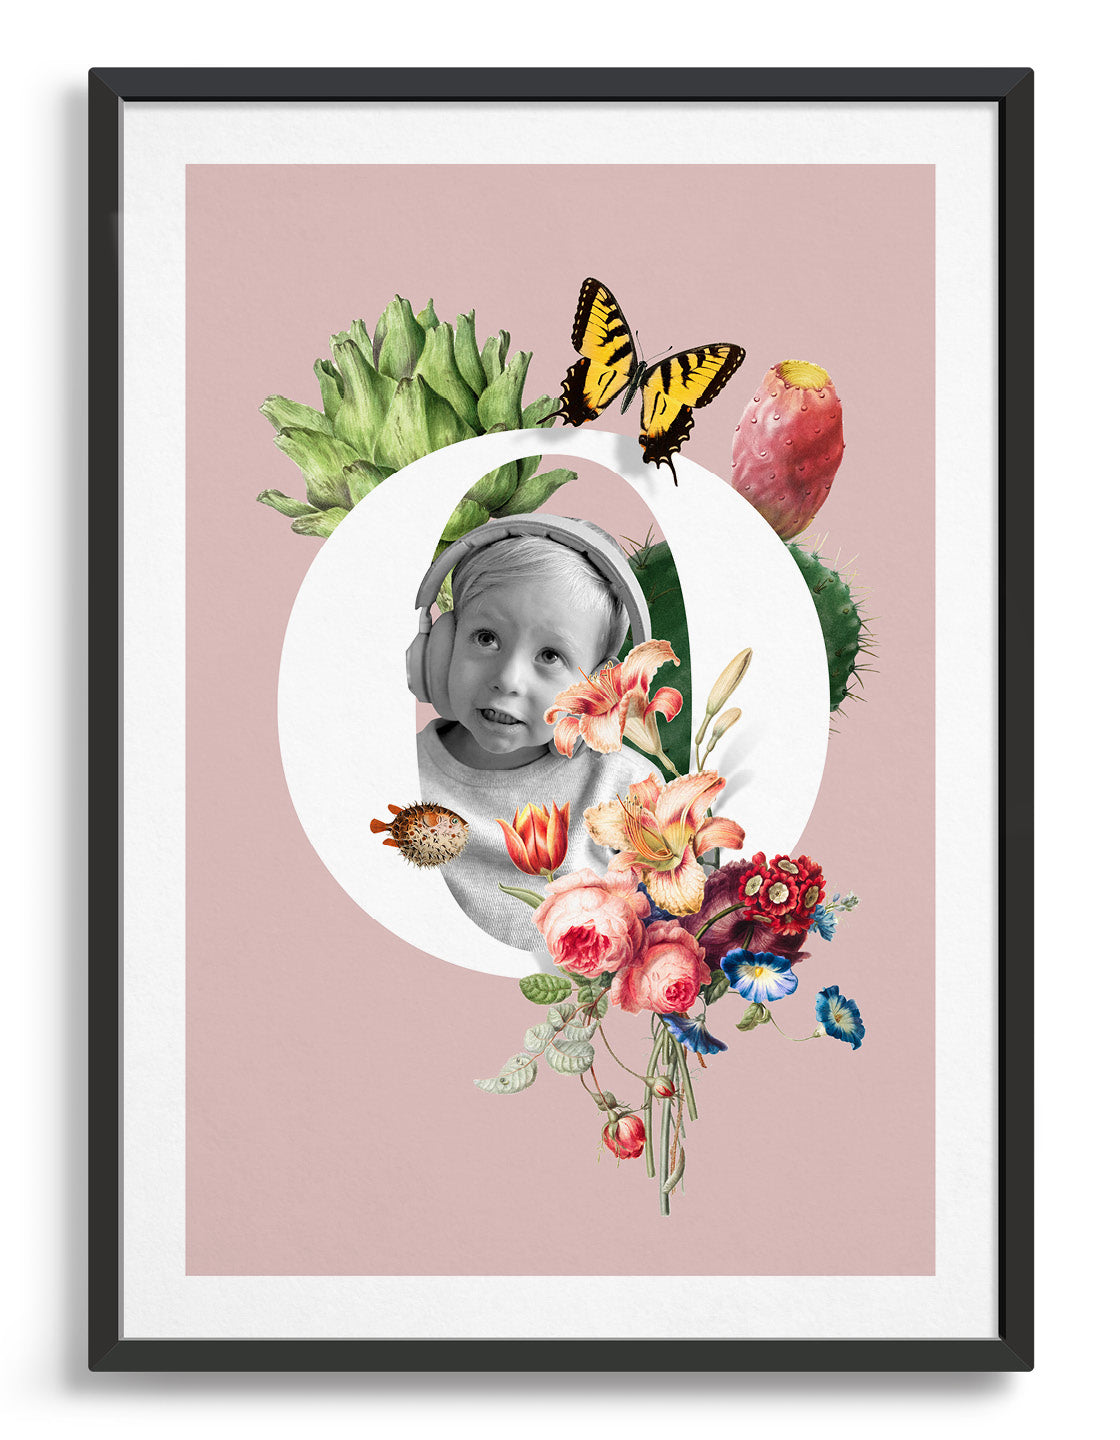 Initial print with custom photo and decorated with vintage illustrations including butterfly, flora and fauna against a pink background